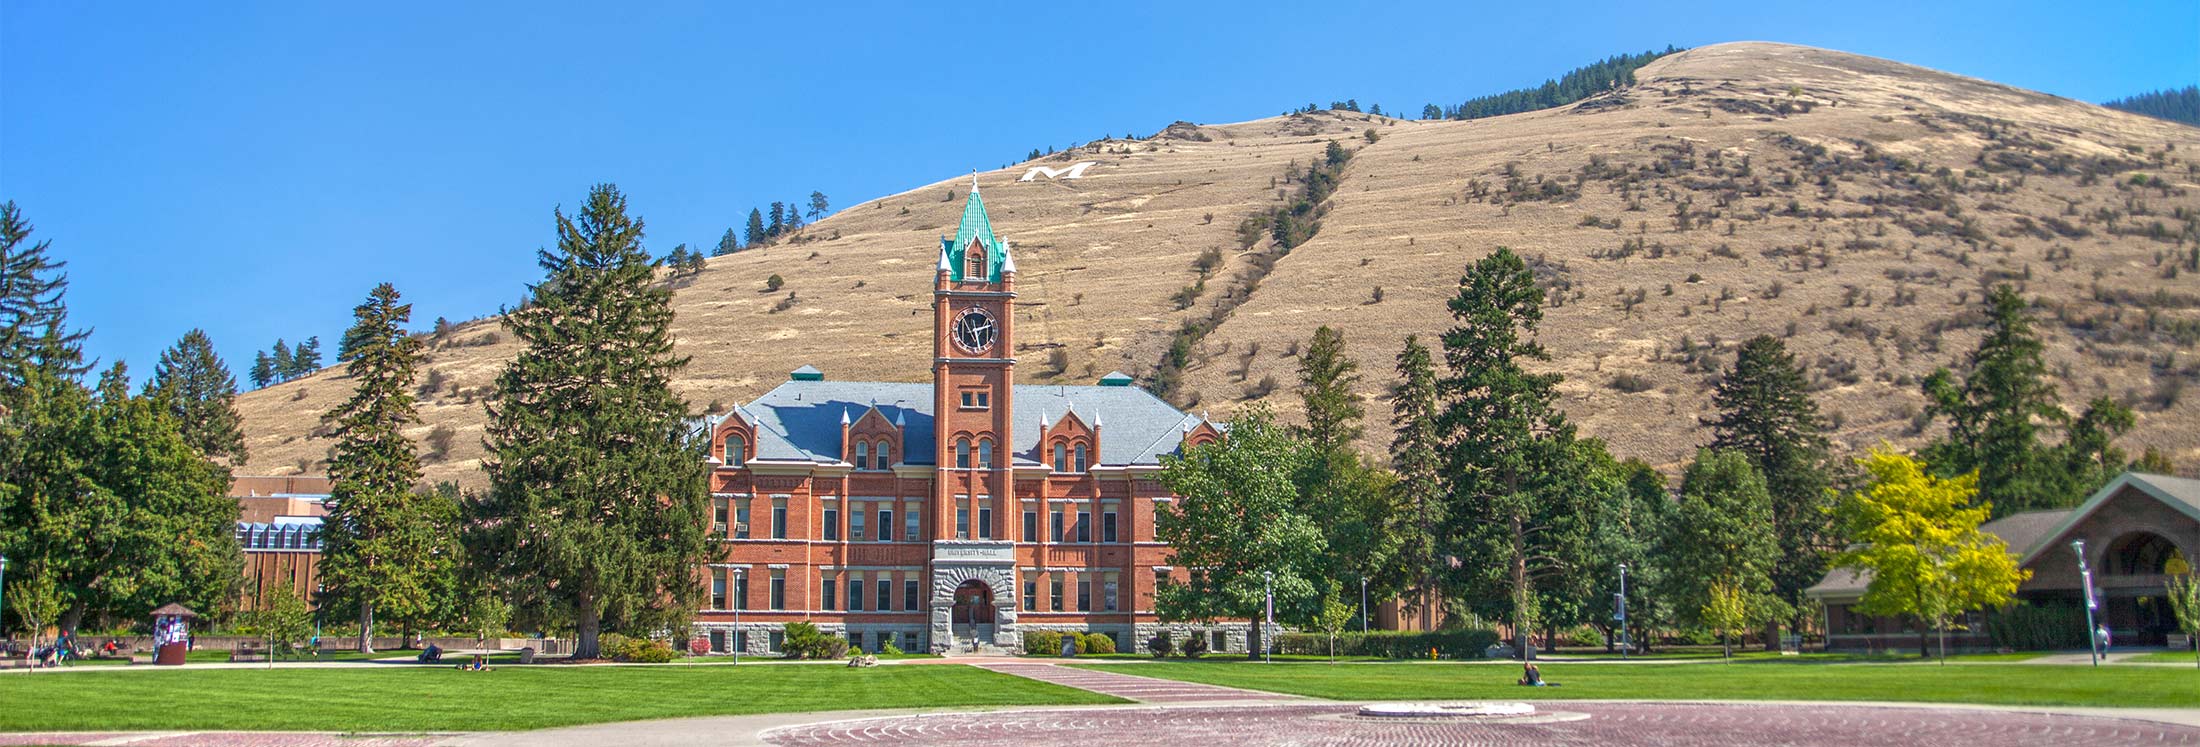 Value Colleges with Beautiful Campuses: #8 University of Montana